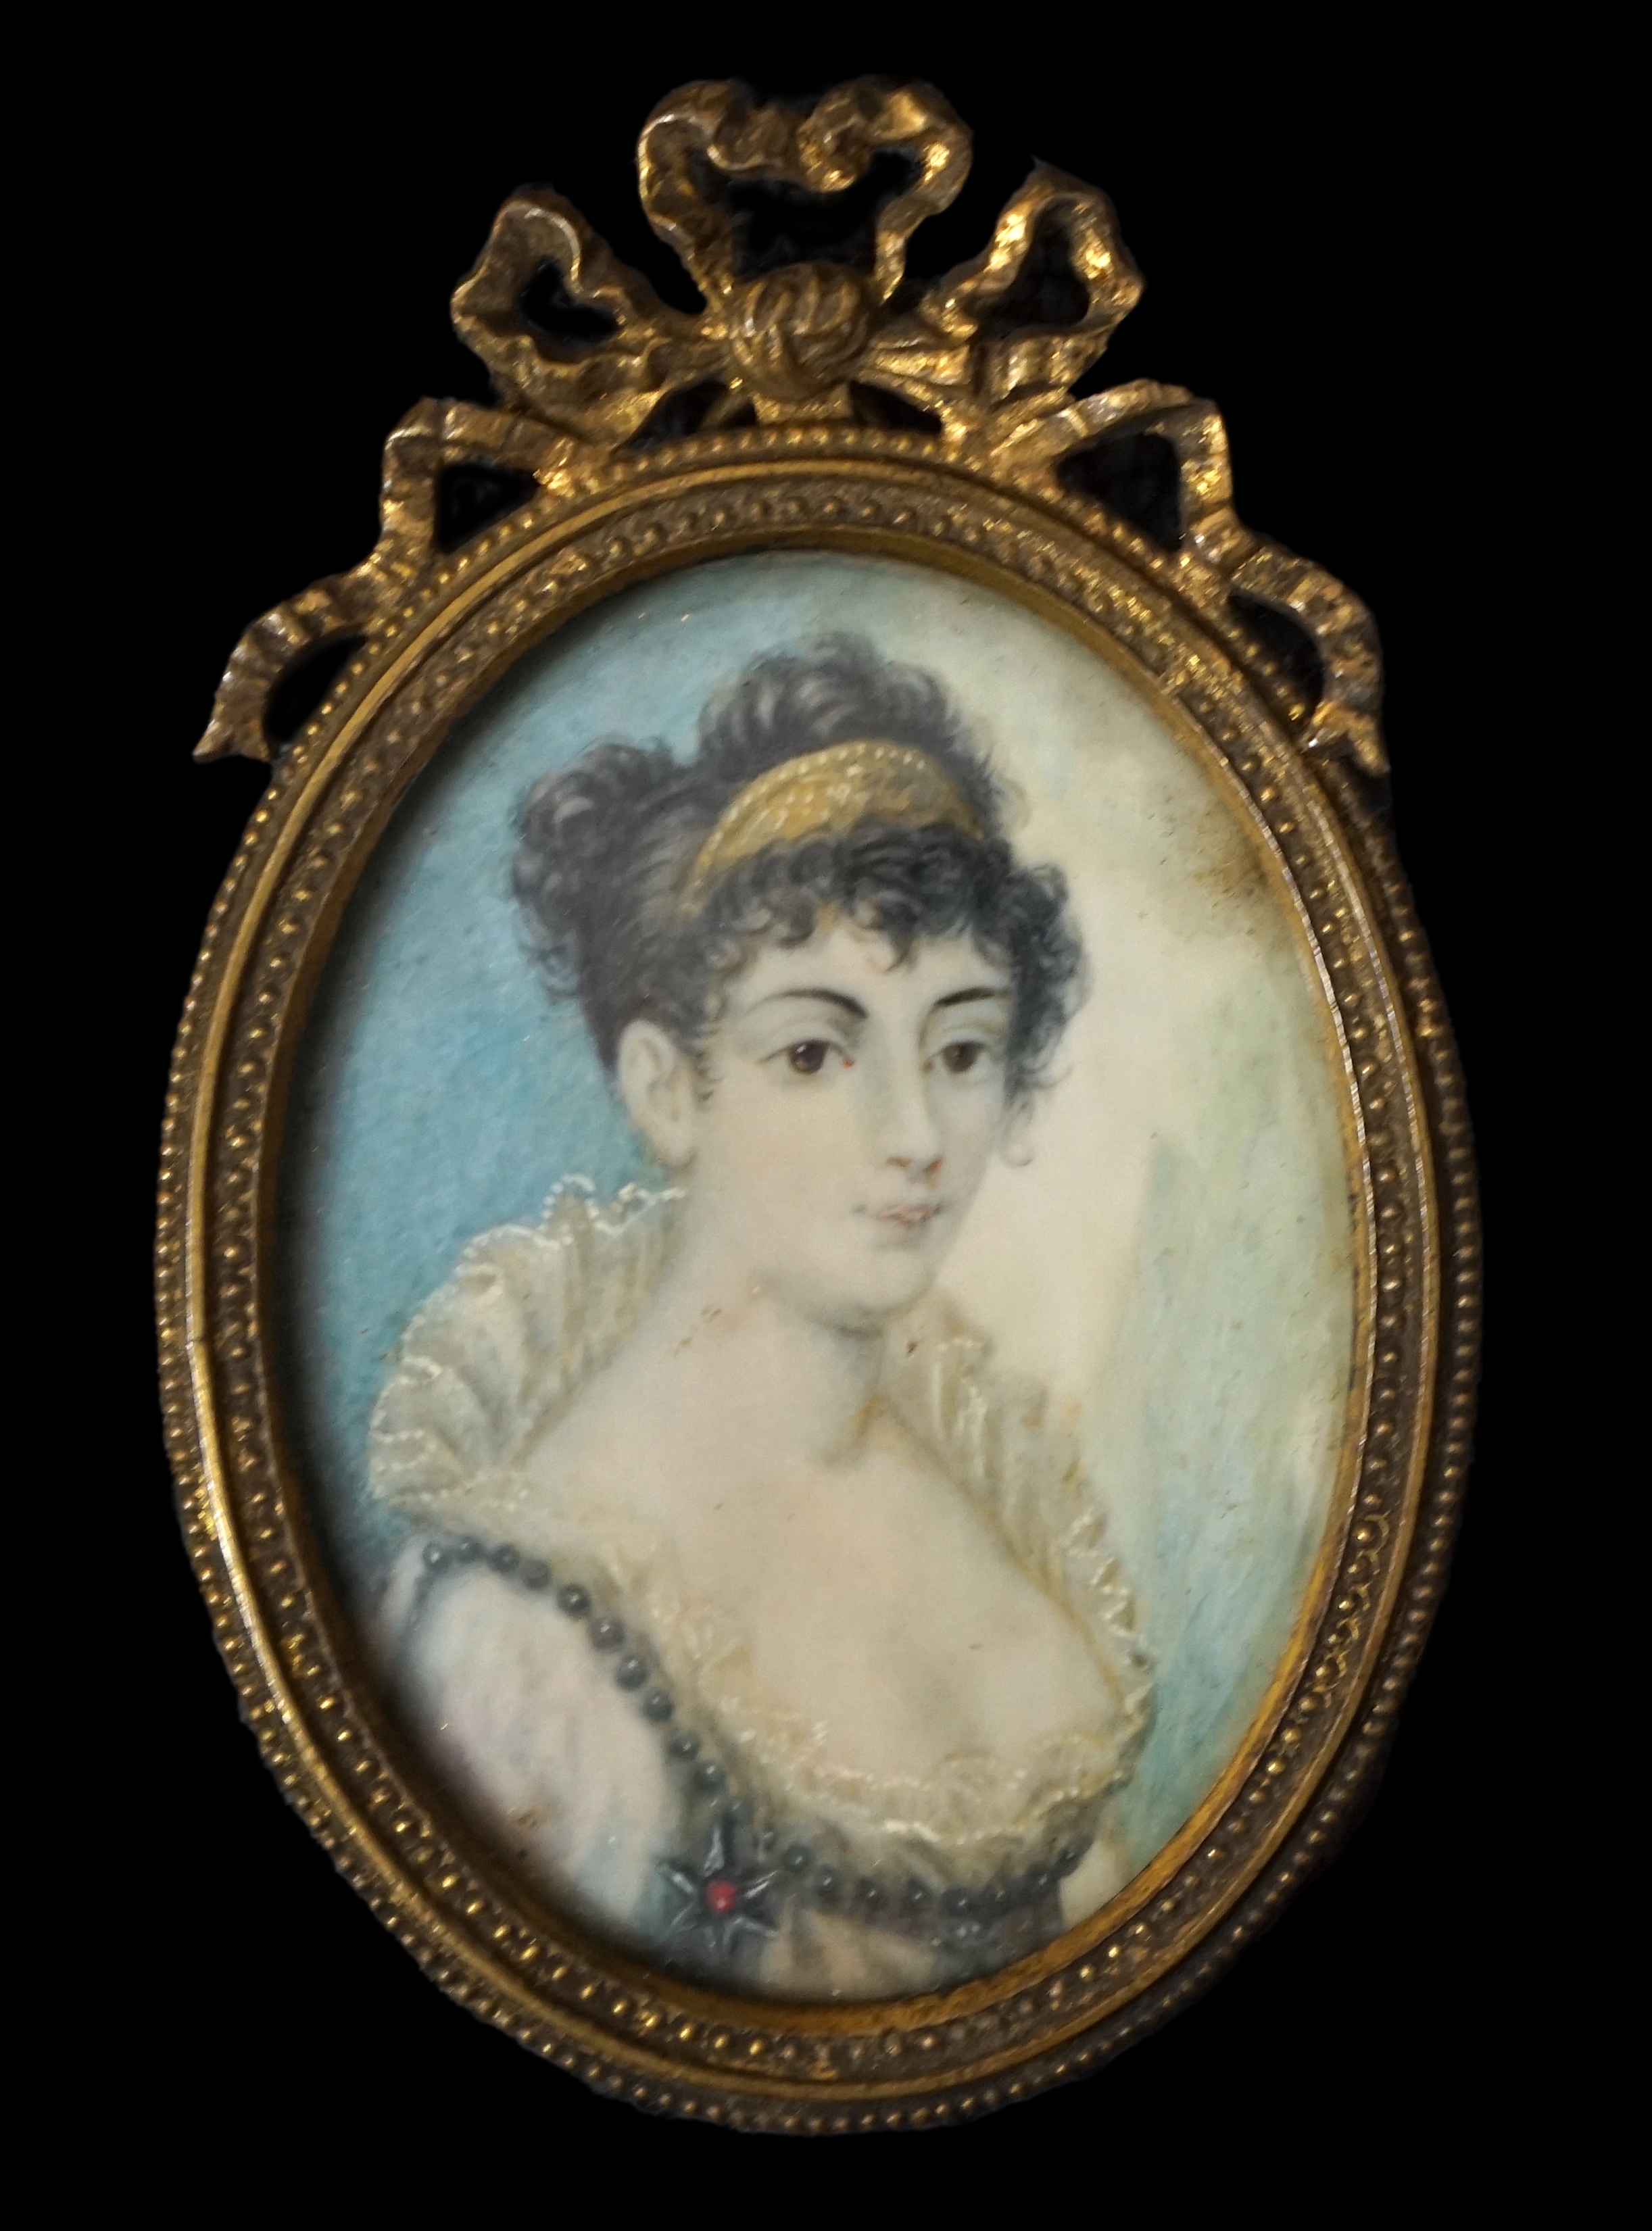 Late 19th century French School, Portrait miniature of Empress Josephine, watercolour on ivory, 7 x 5cm. CITES Submission reference WQDYQX9M